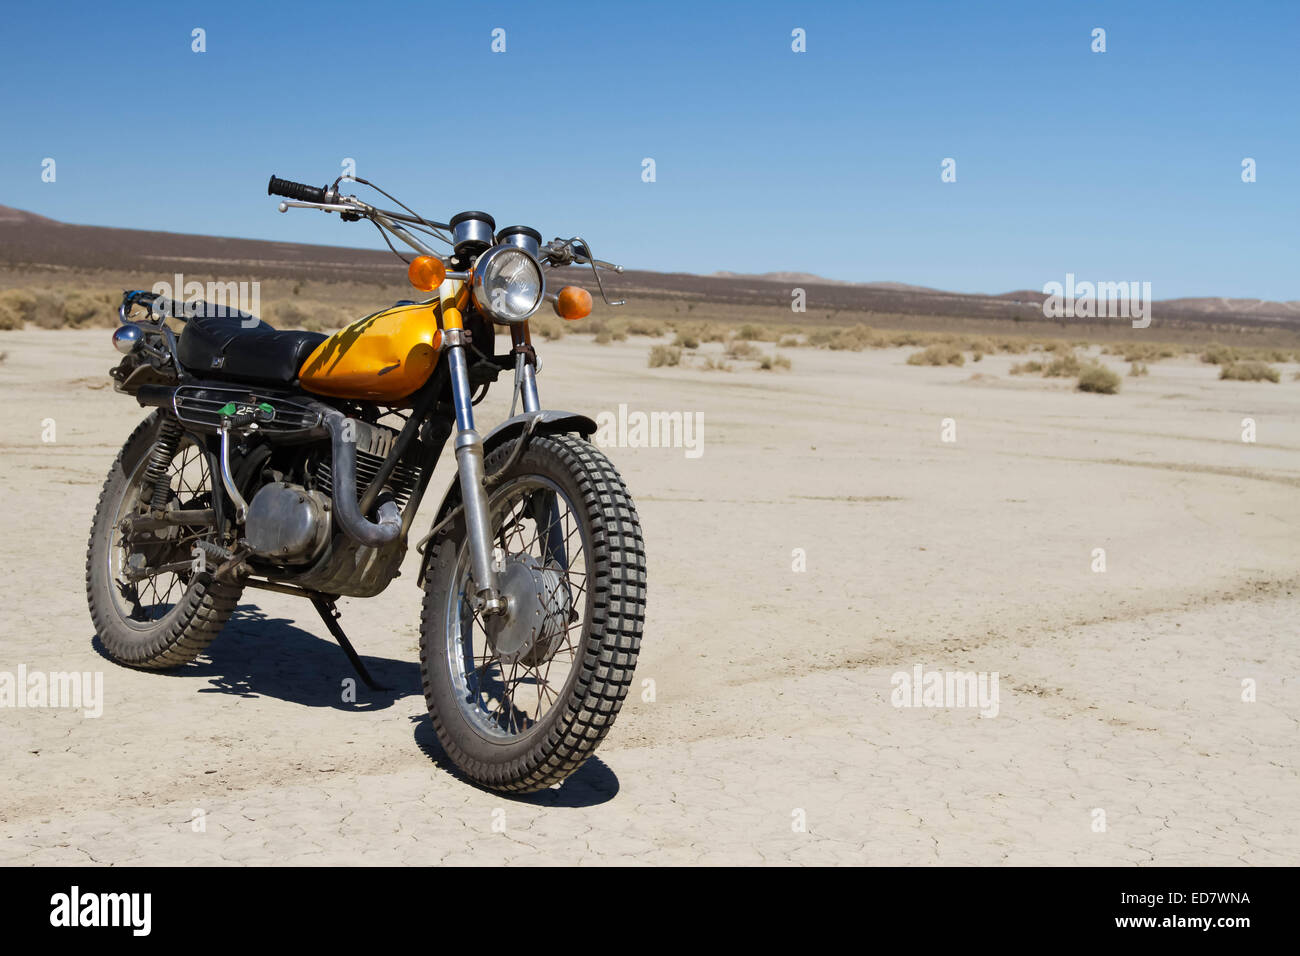 A 70's motorcycle in the desert. Stock Photo